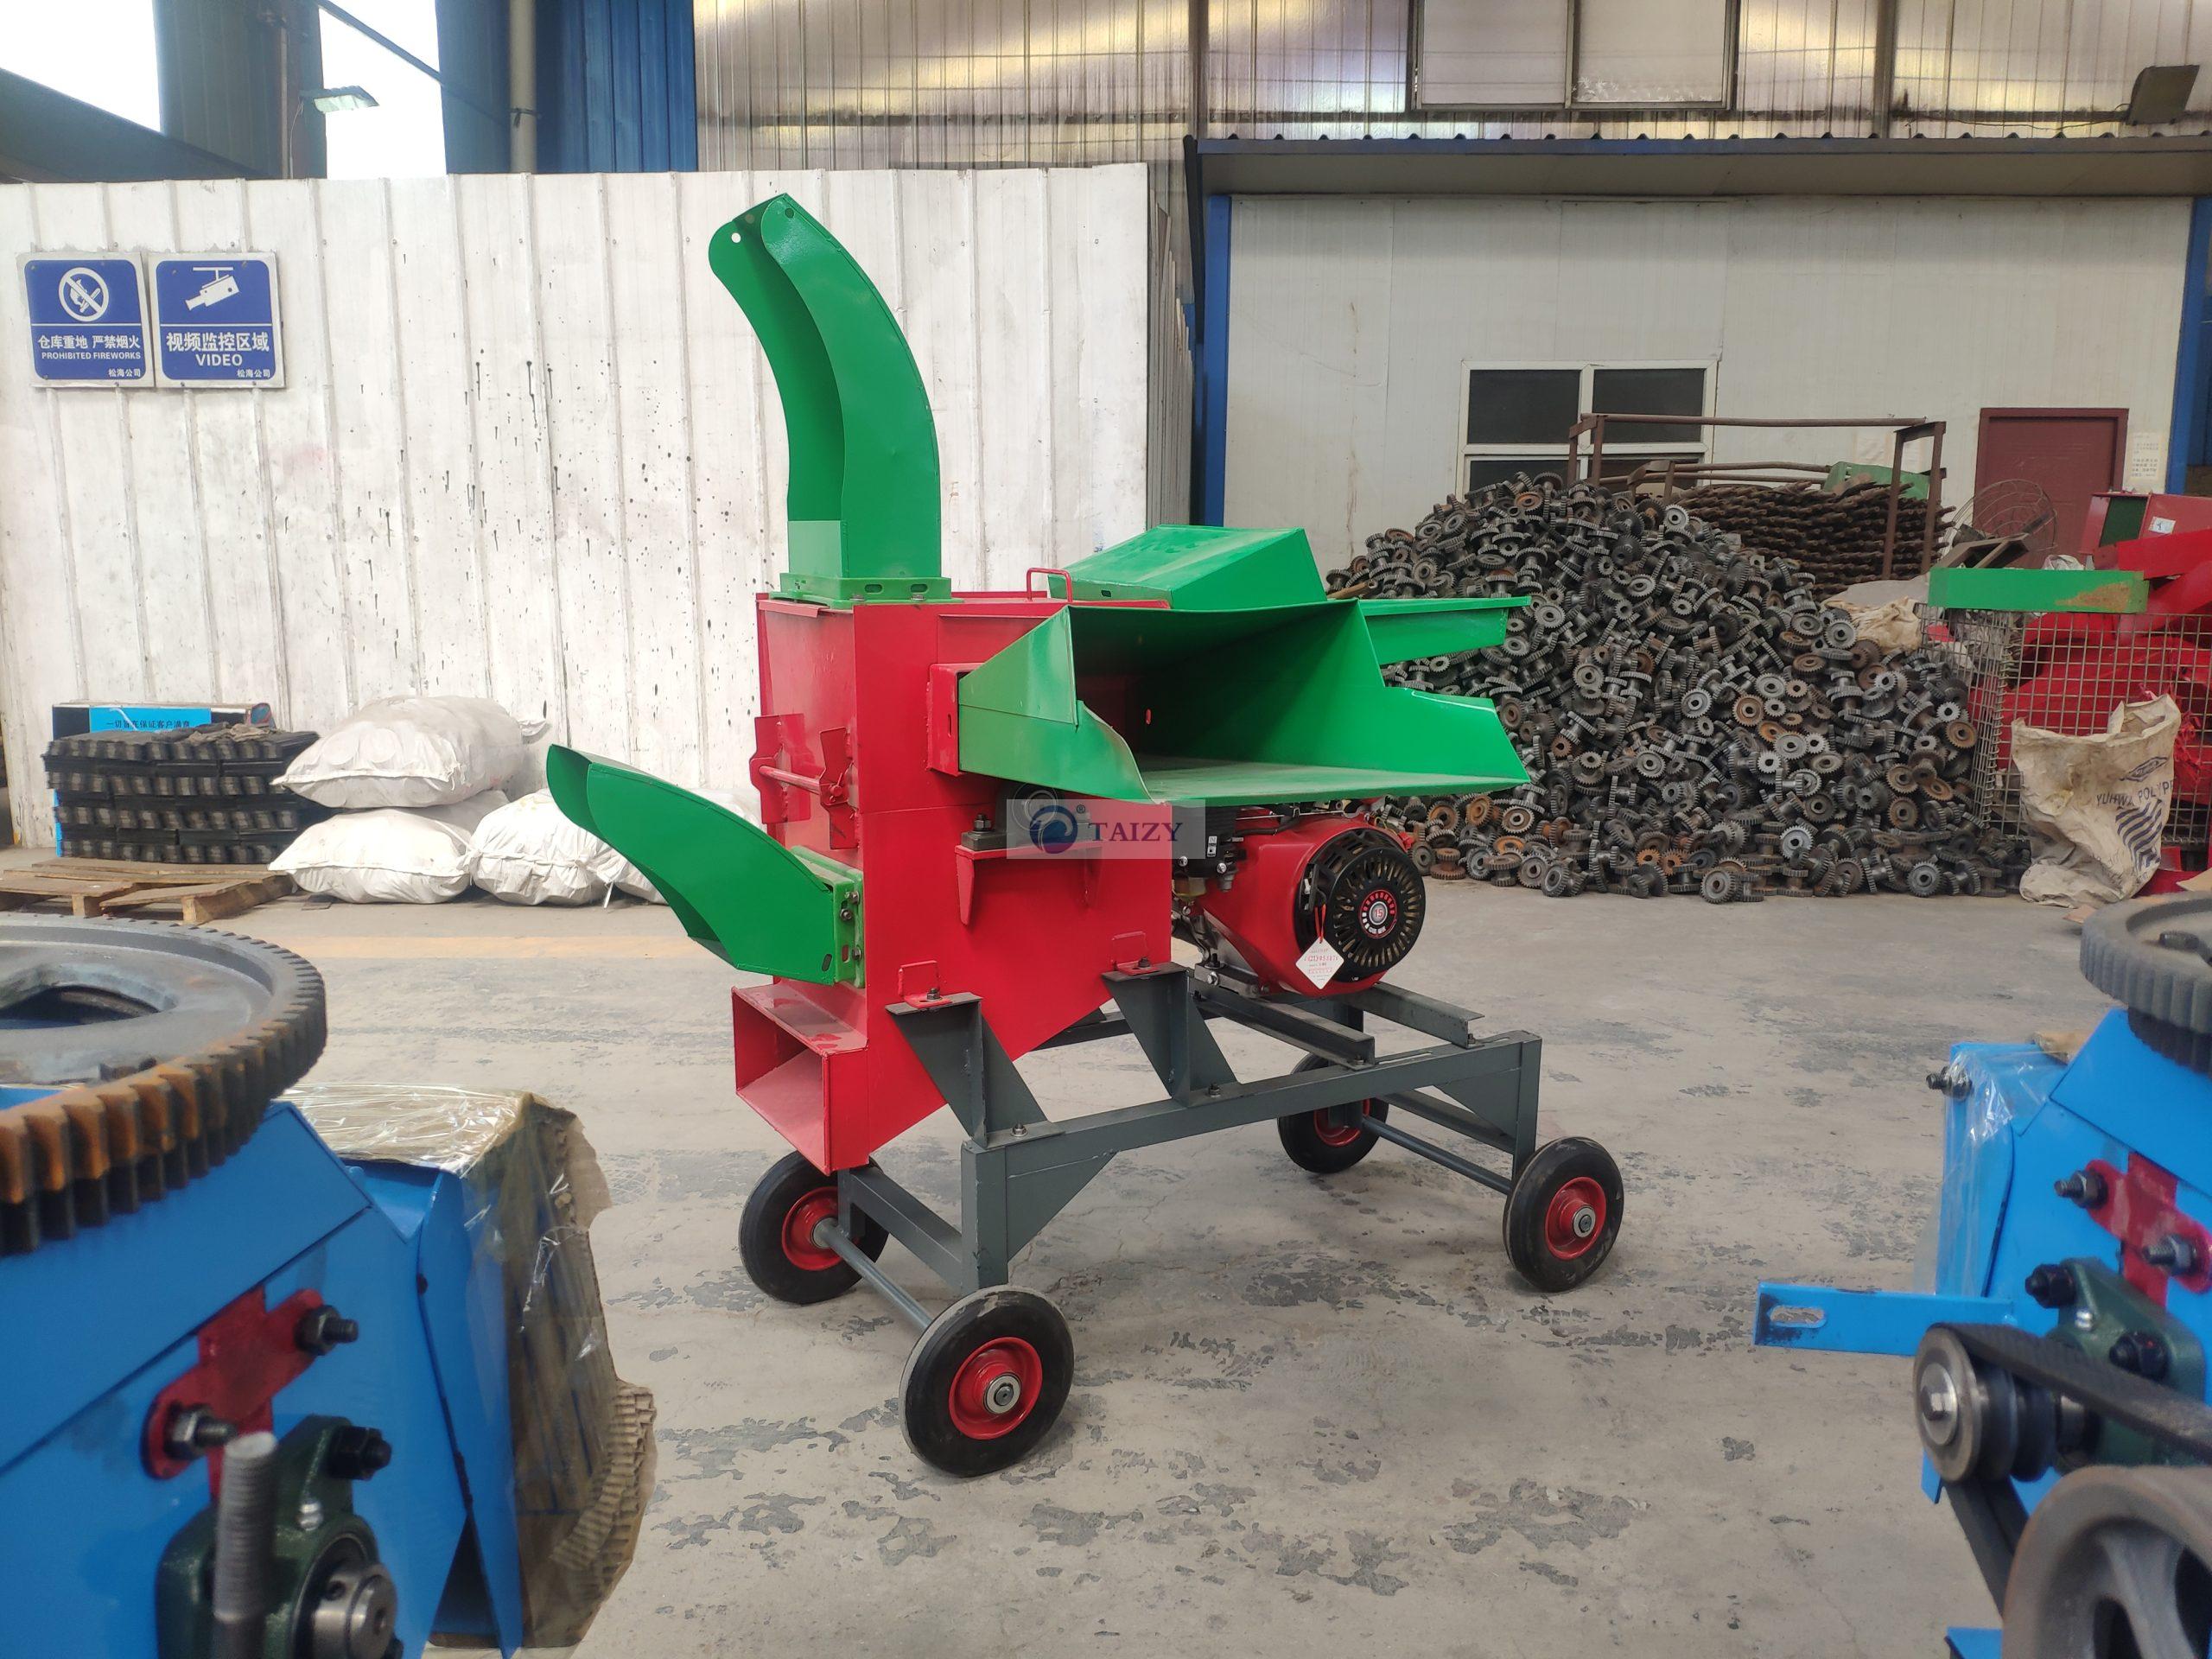 20 chaff cutter and grain grinders sold to Peru